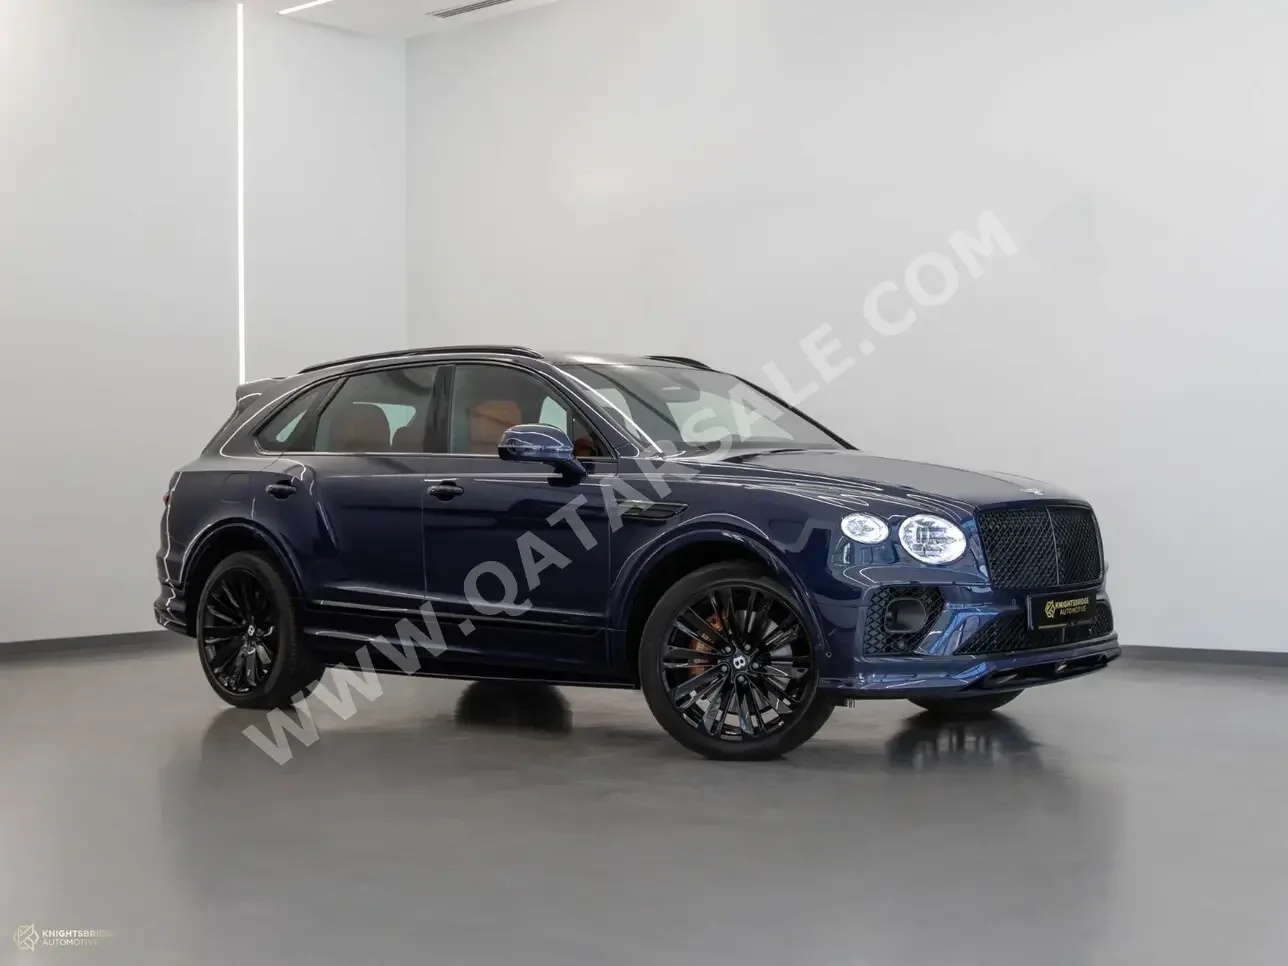 Bentley  Bentayga  Speed  2021  Automatic  38,400 Km  12 Cylinder  All Wheel Drive (AWD)  SUV  Blue  With Warranty